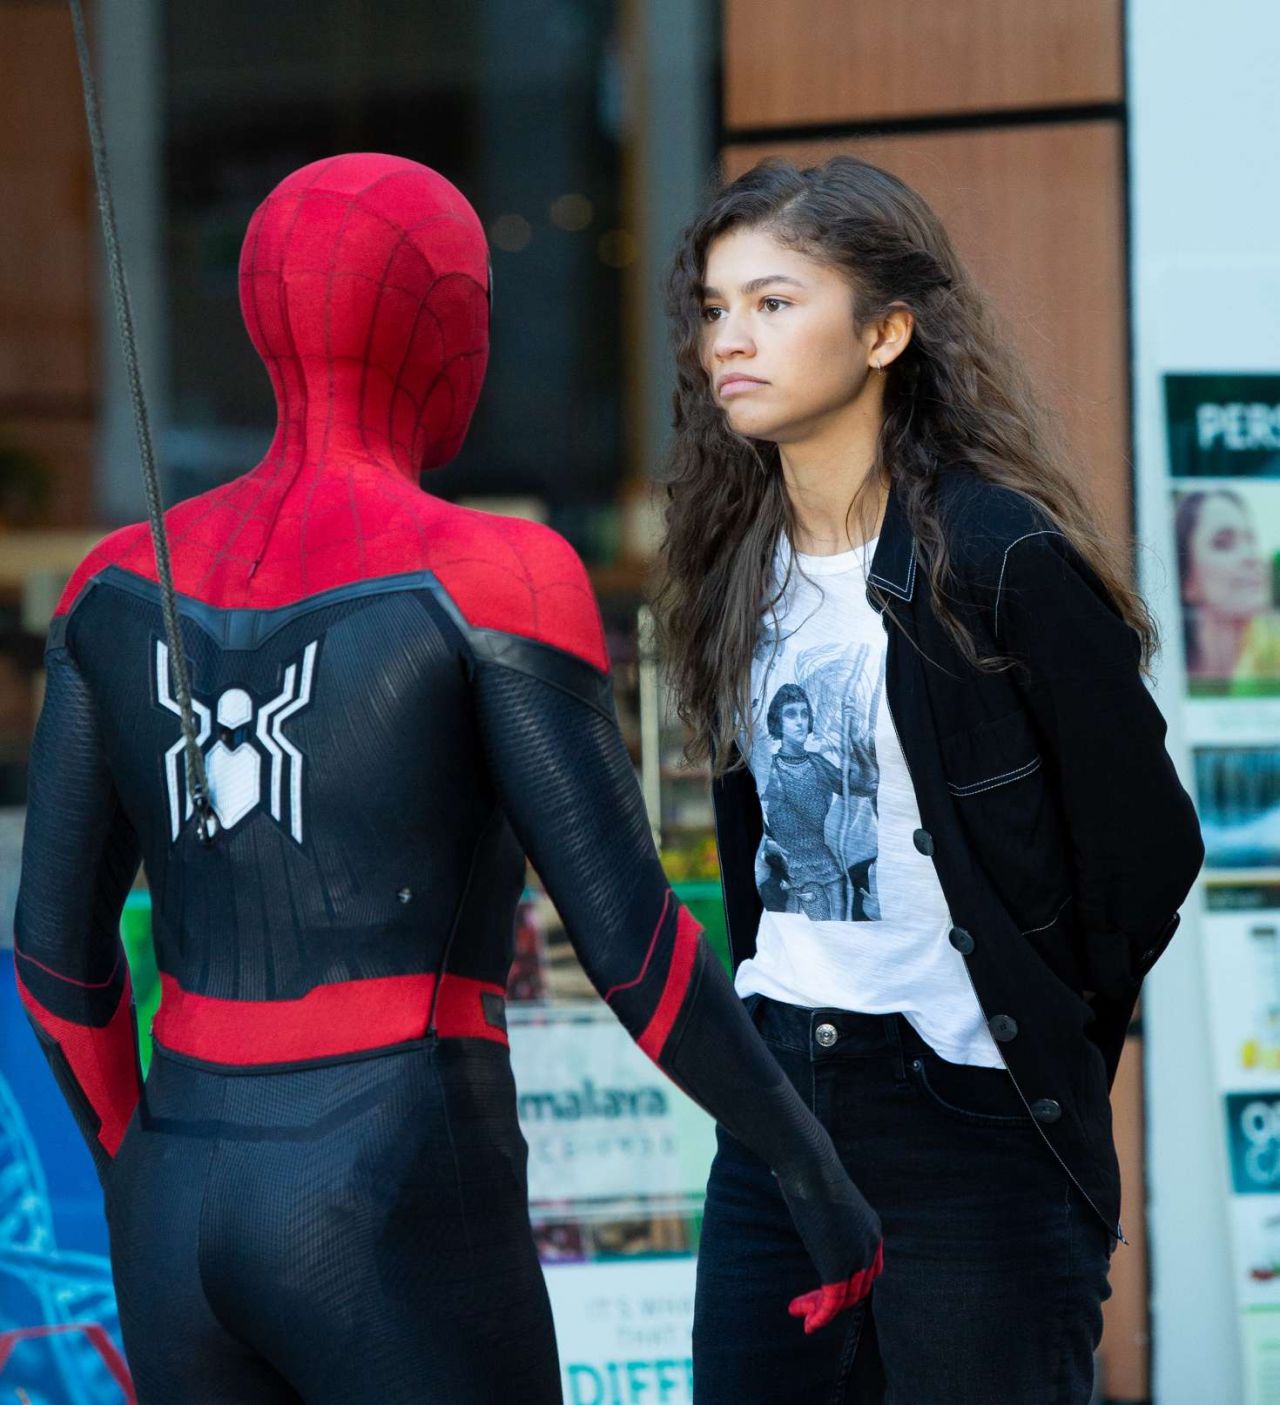 Zendaya - On the Set of "Spiderman: Far from Home" in NY ...